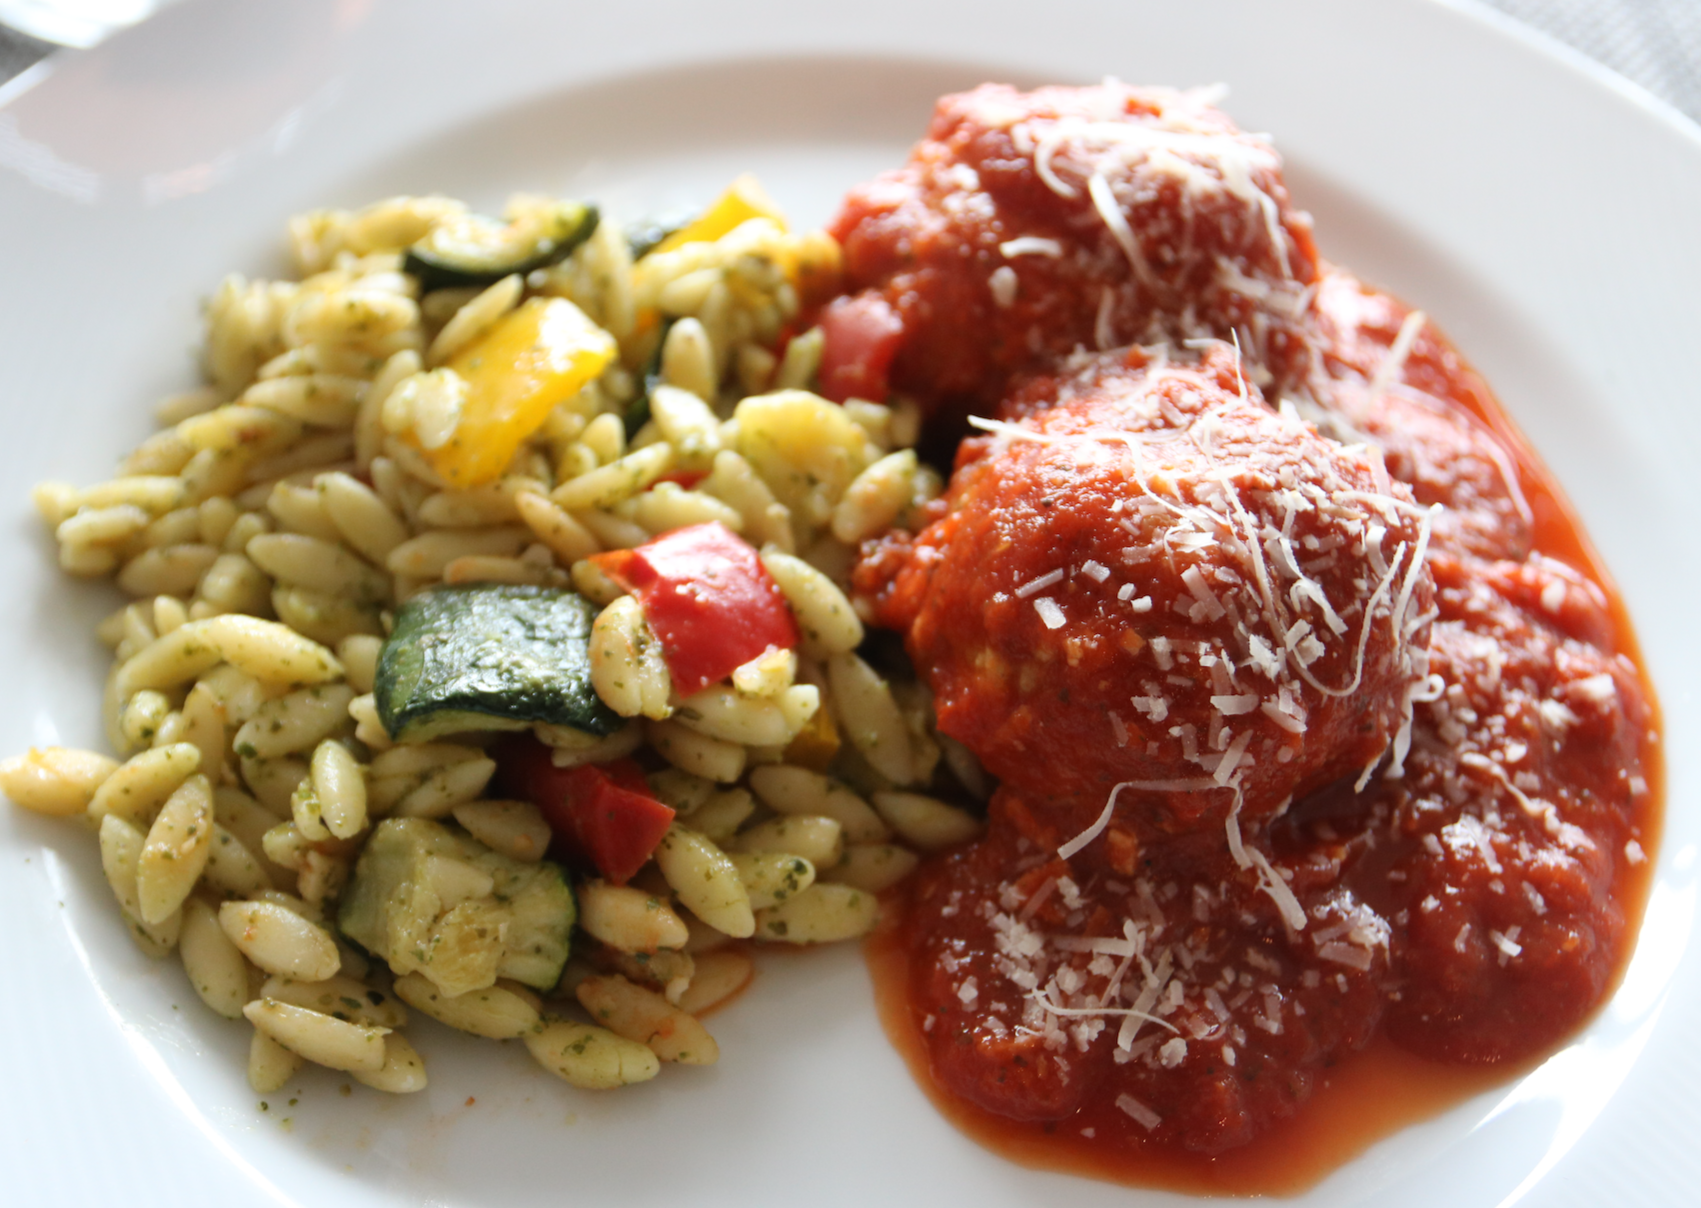 Sicilian Chicken Meatballs with Vegetable Orzo (Serves 2) - Today's Menu